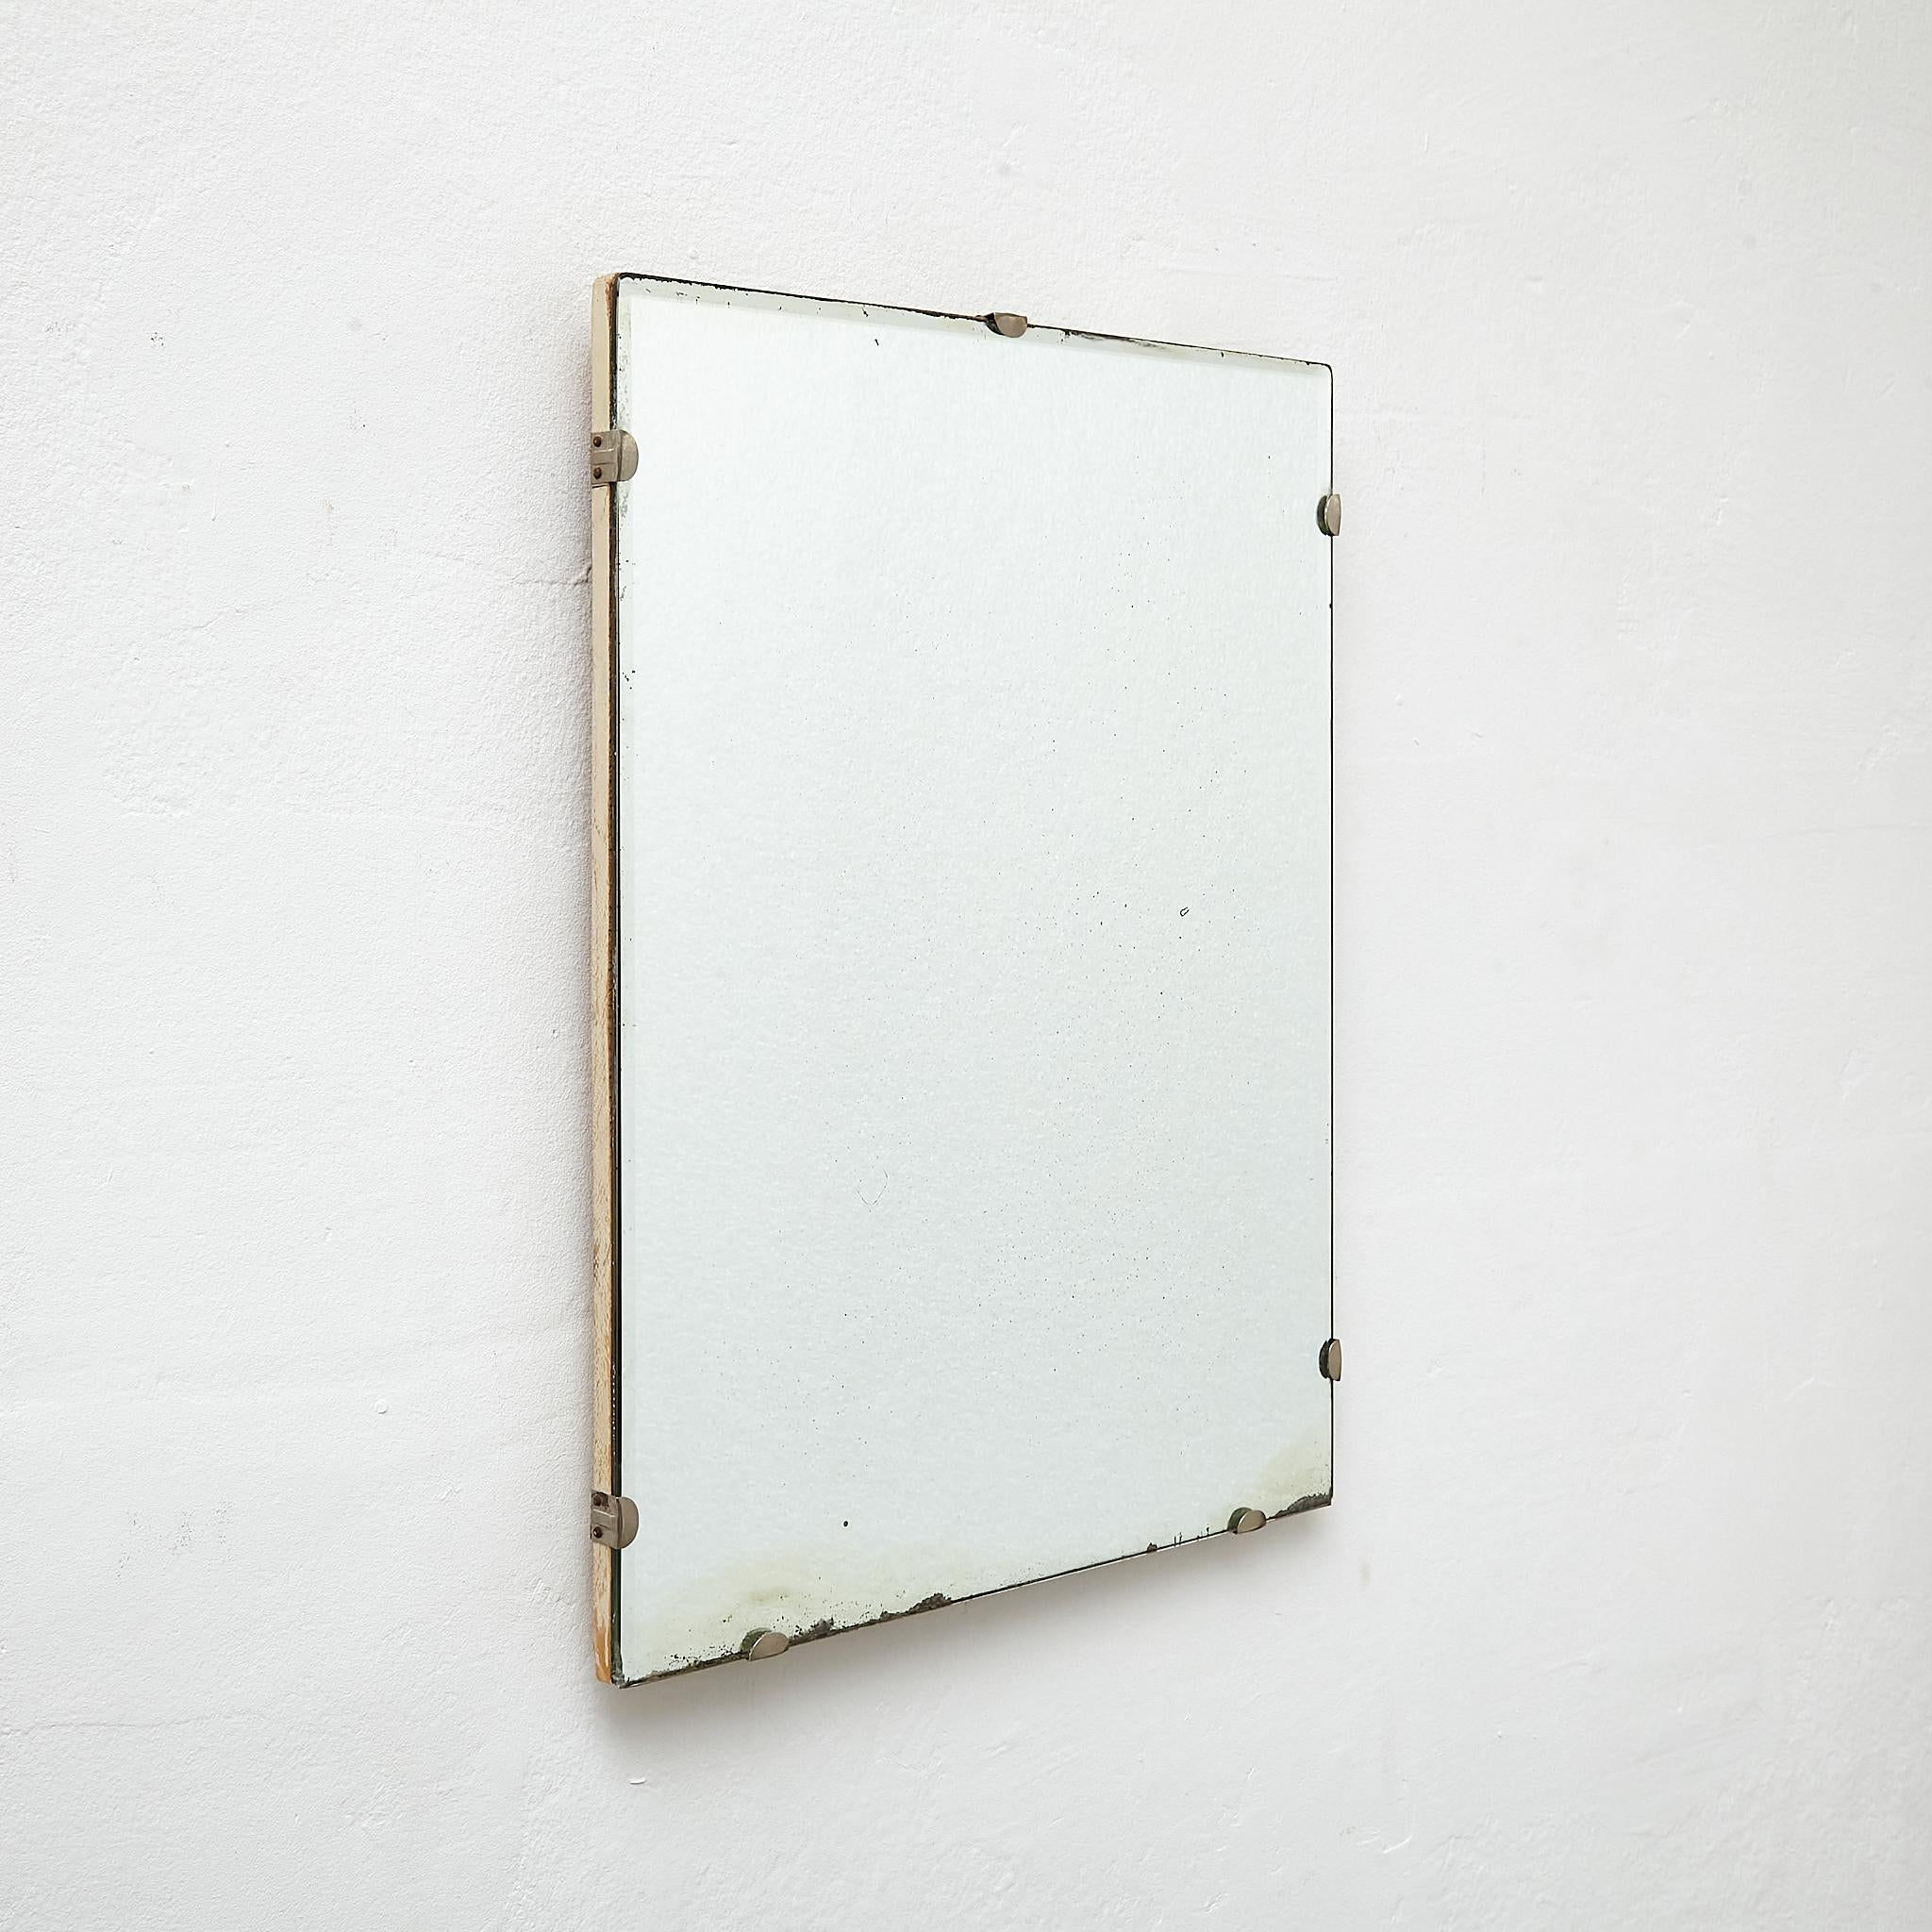 Antique Early 20th century French Wall Mirror.

Manufactured France, circa 1940.

Materials:
Wood, mirror

Dimensions: 
D 2 x W 42 cm x H 54 cm

In original condition, with minor wear consistent with age and use, preserving a beautiful